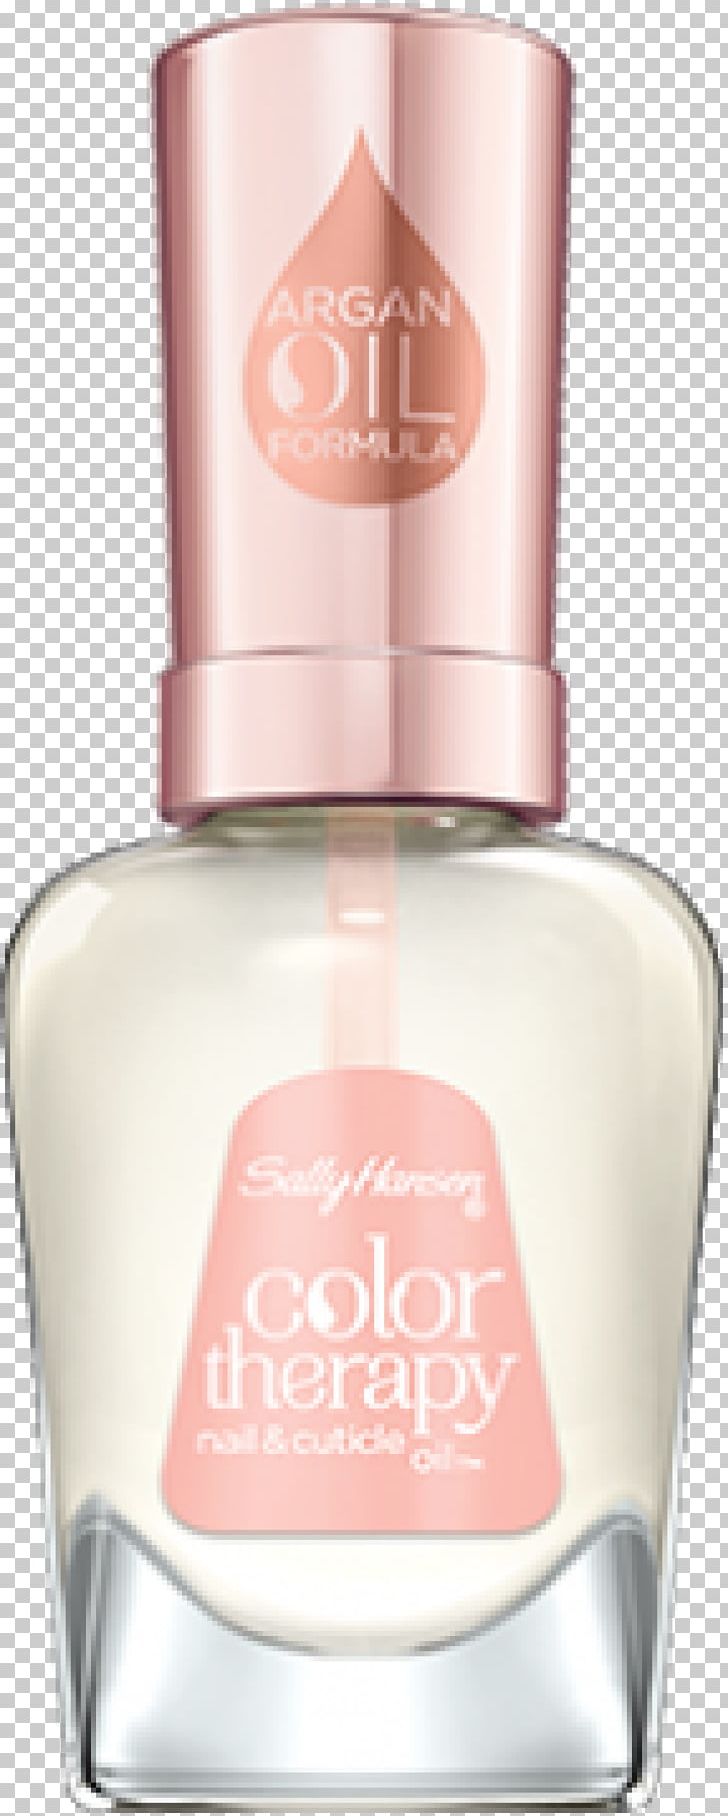 Sally Hansen Color Therapy Nail Polish Sally Hansen Miracle Gel Polish Sally Hansen Insta-Dri Top Coat PNG, Clipart, Accessories, Beauty, Coat, Color, Color Therapy Free PNG Download